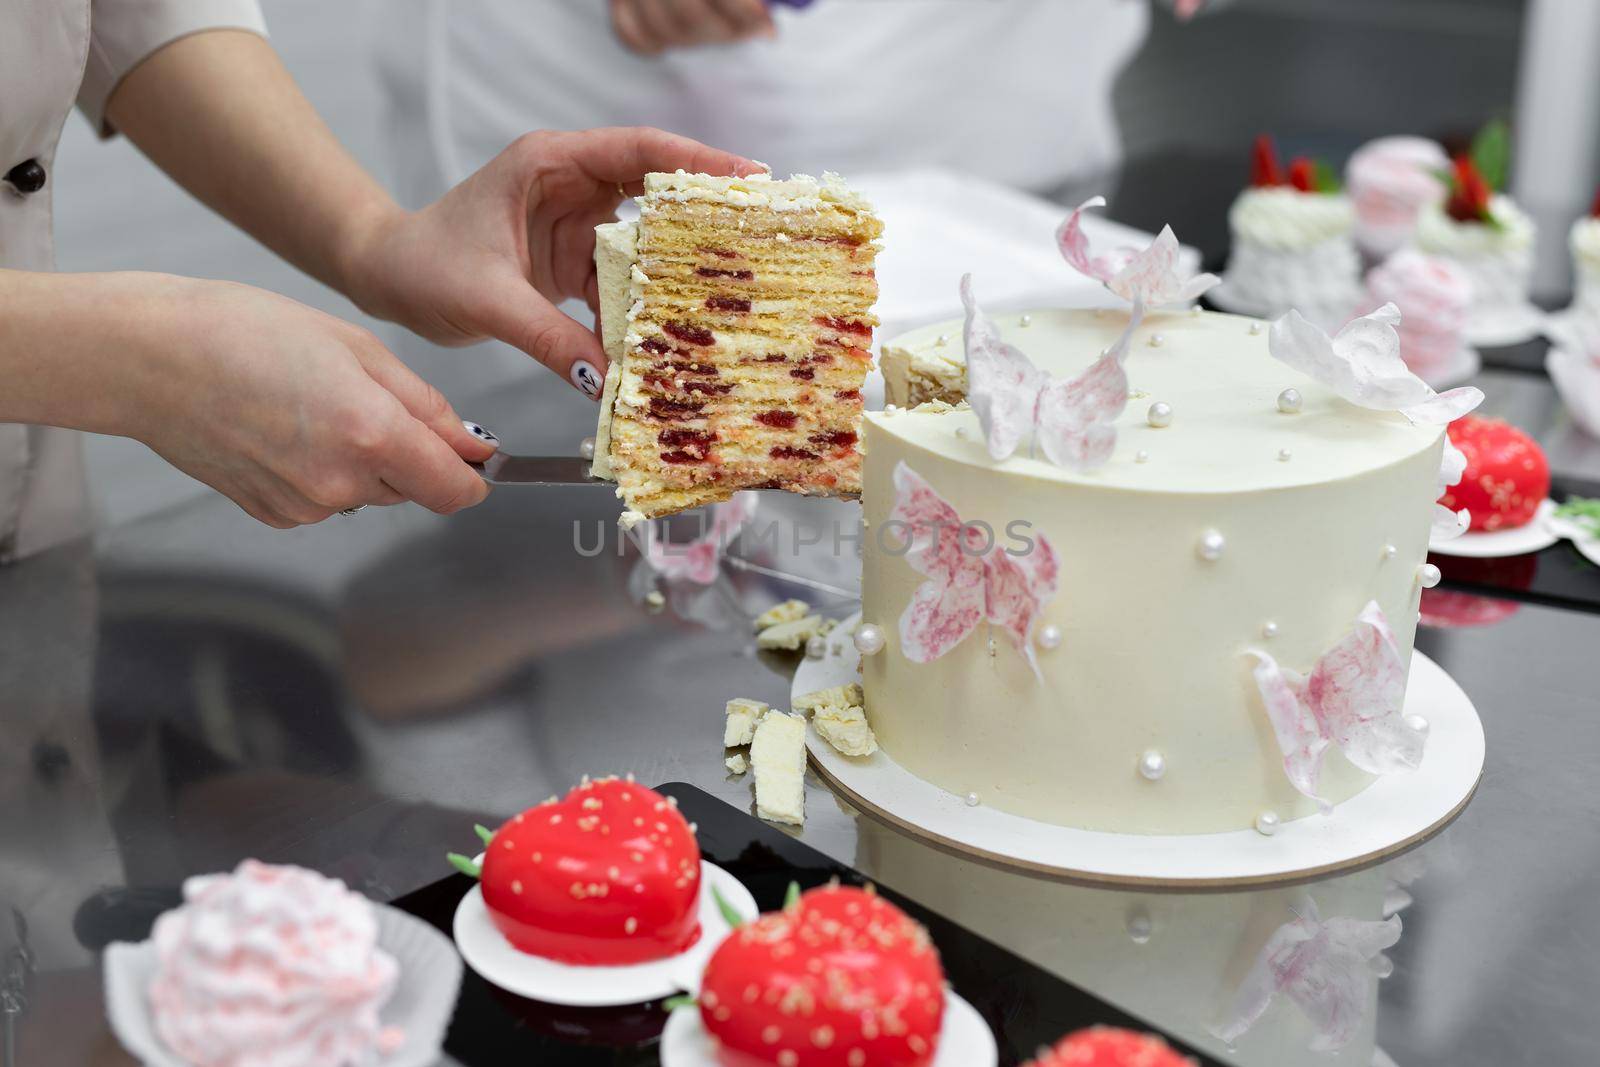 Pastry chef's hands cut the cake with a knife at the master class